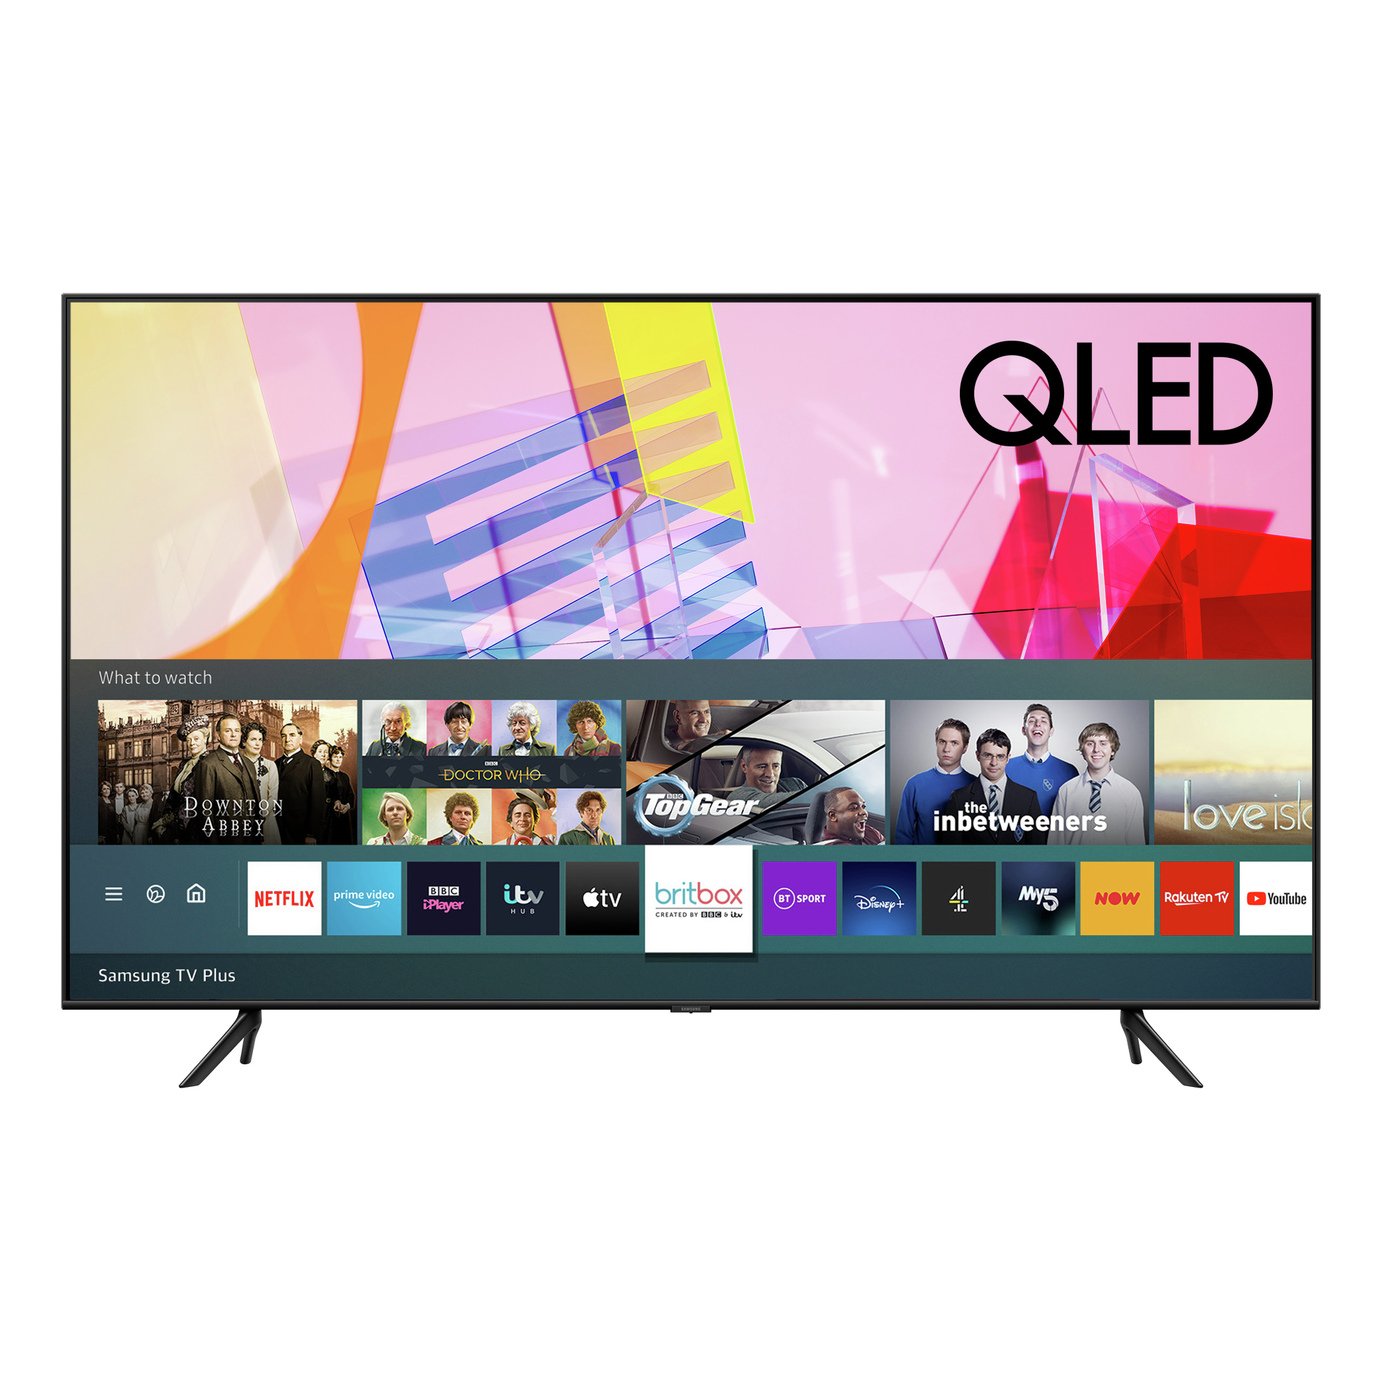 Samsung 43 Inch QE43Q60T Smart Ultra HD QLED TV with HDR Review